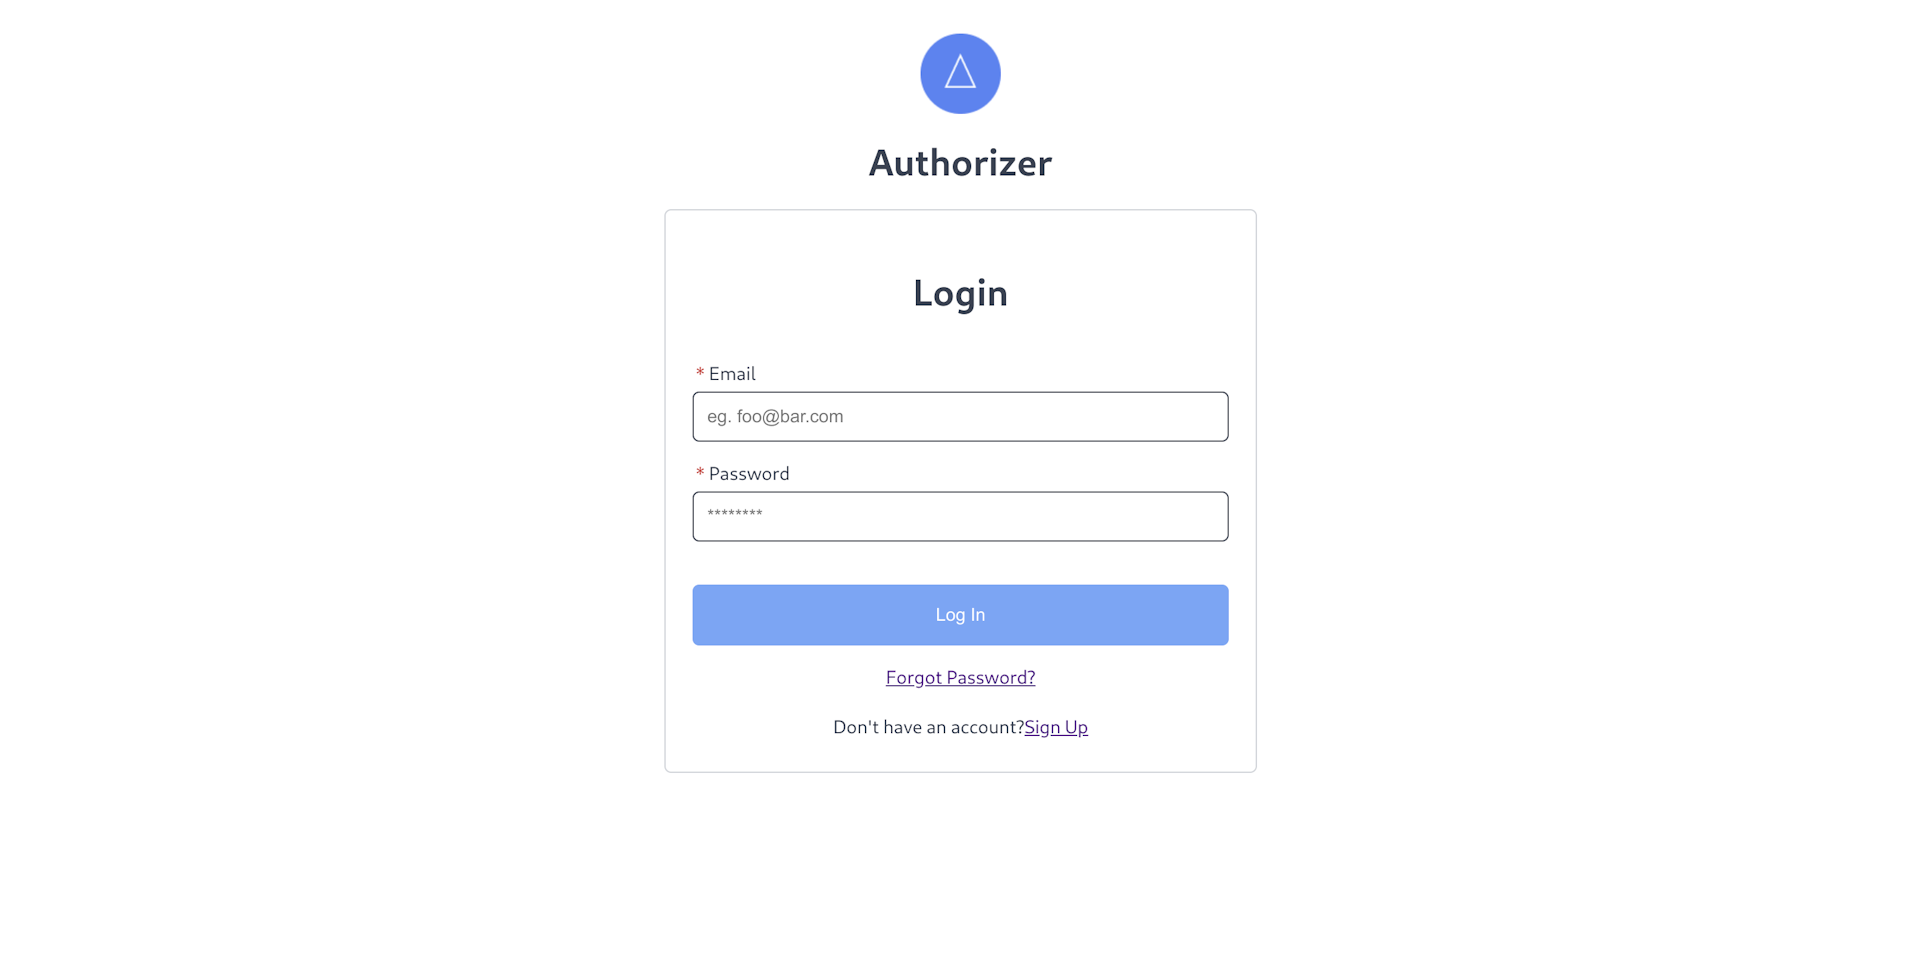 Authorizer initial login page